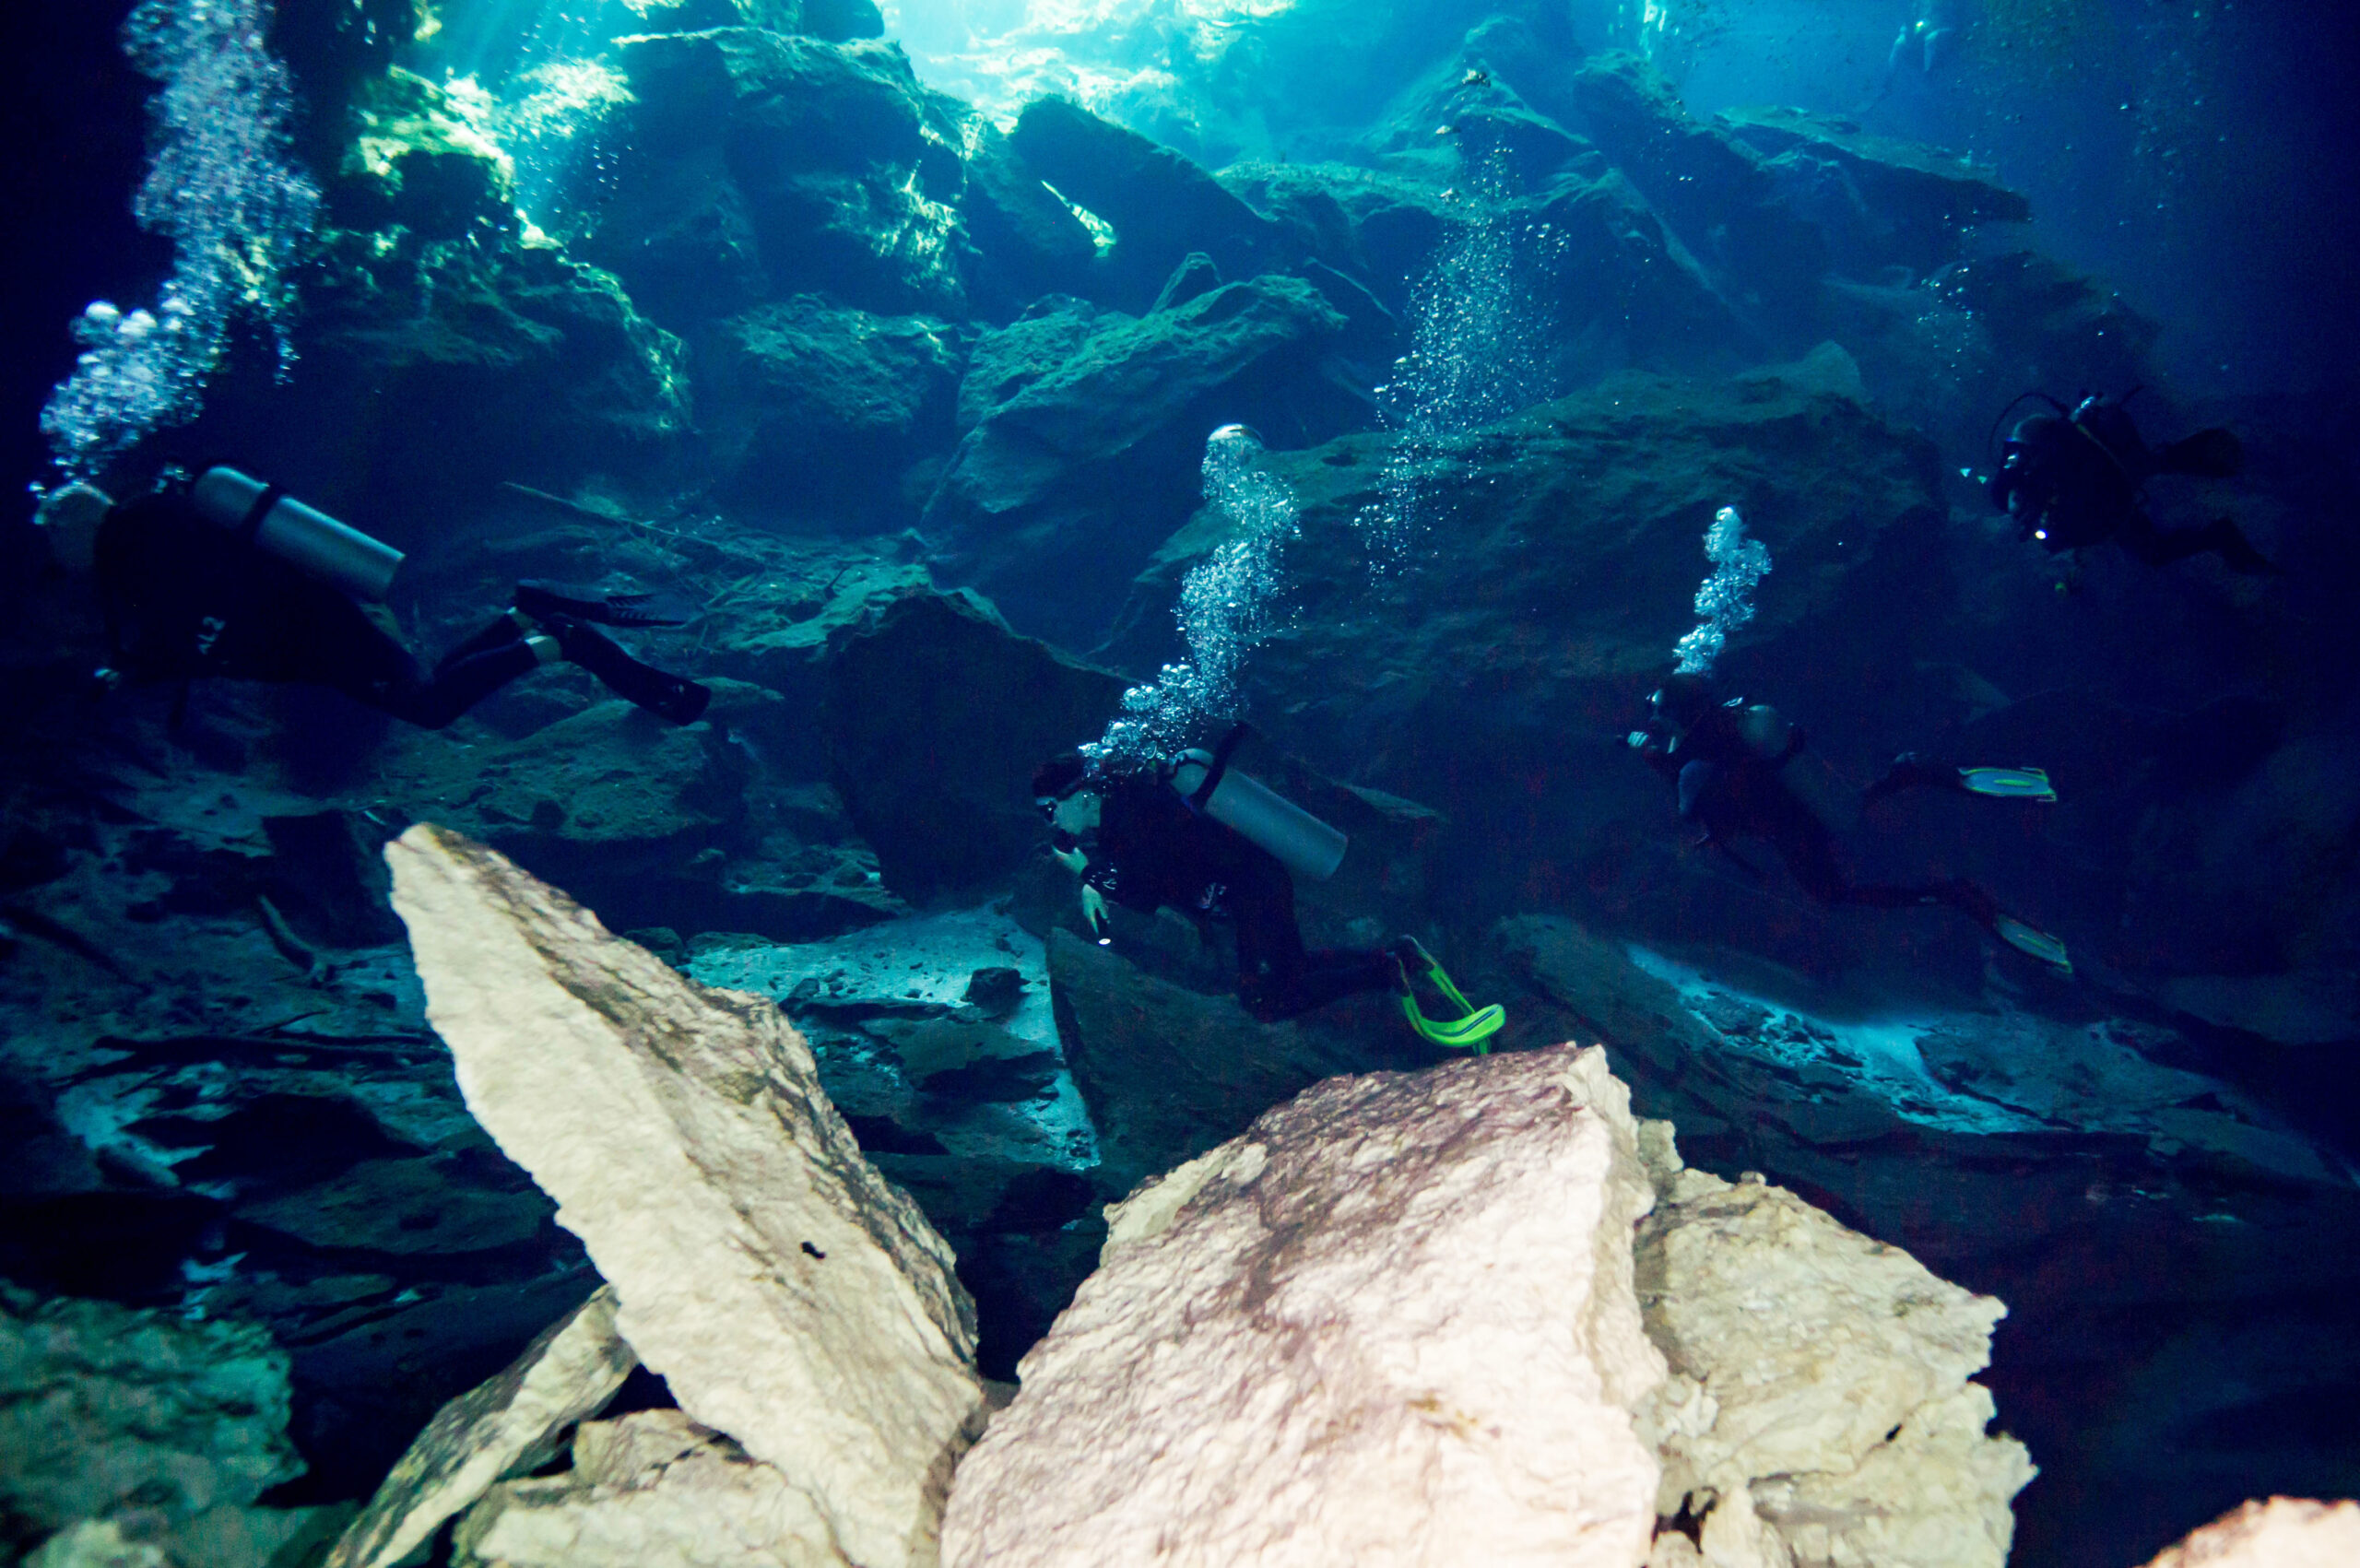 Divers swim in the Dos Ojos flooded cave system near Cancún, Mexico. (photo by Ratha Grimes)